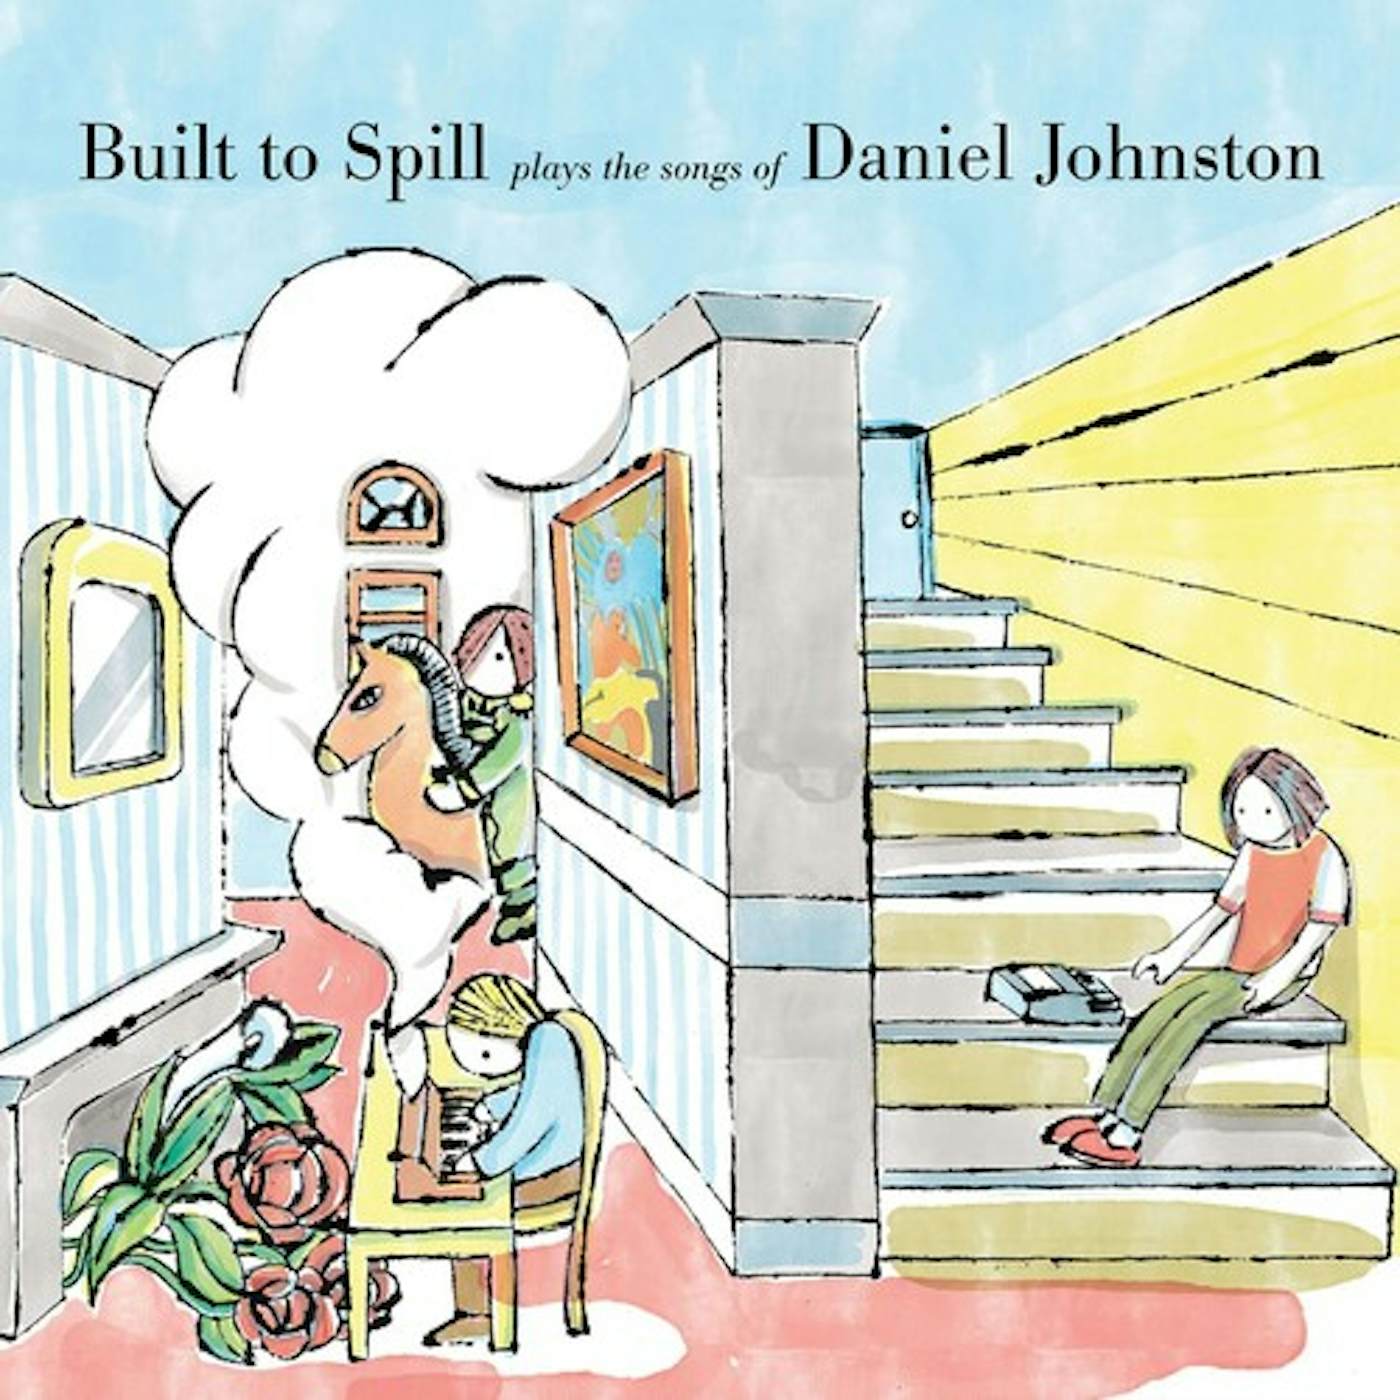 BUILT TO SPILL PLAYS Vinyl Record